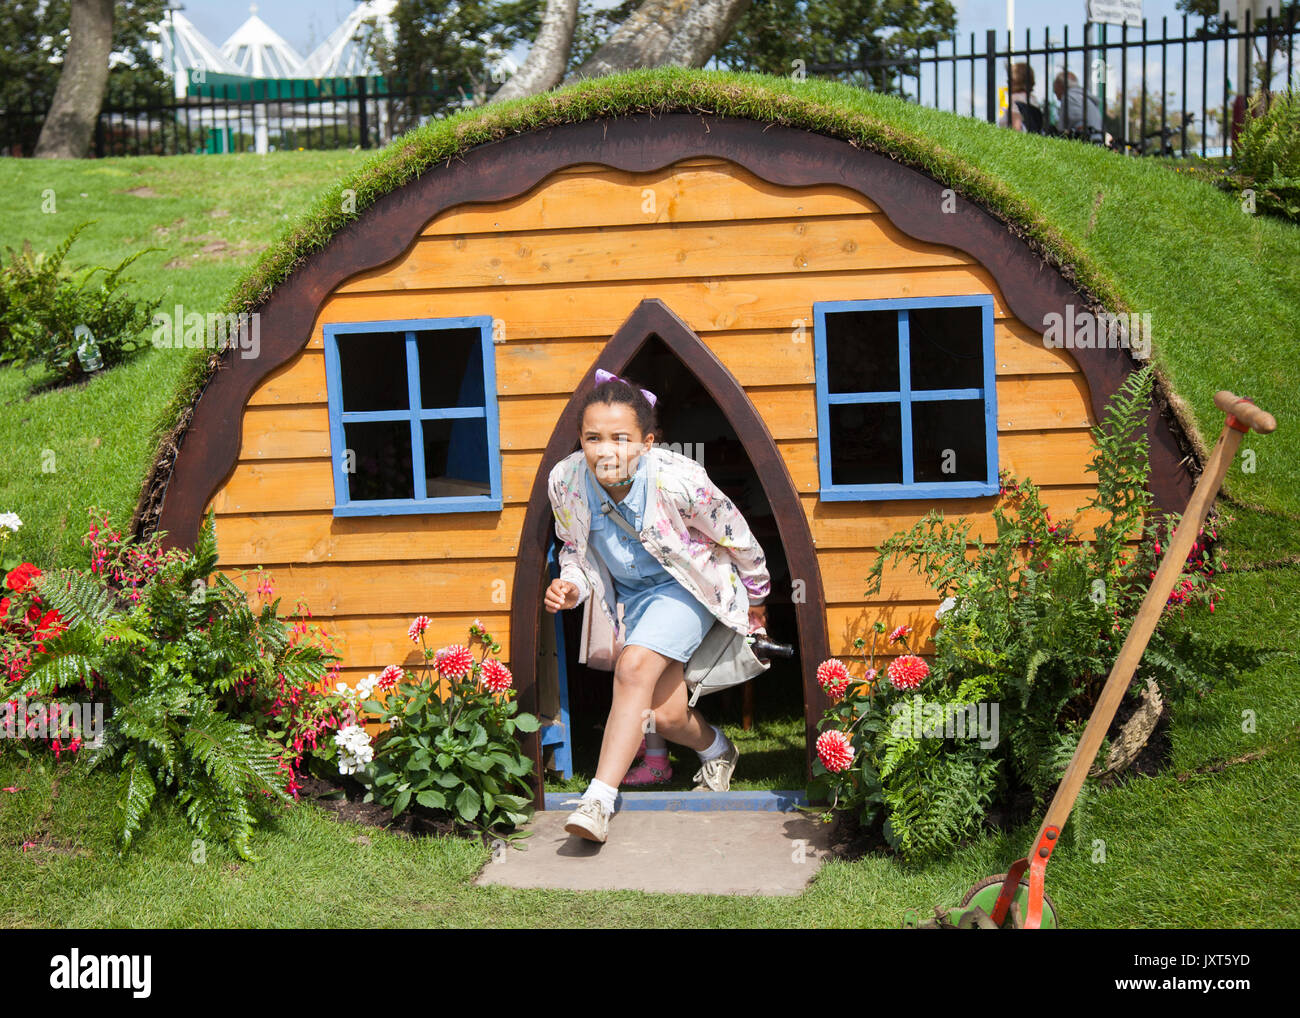 Turf covered rounded garden pod or shed at Southport, Merseyside, UK. 17th Aug, 2017. Curious Hobbit House being visited on the pening day at Southport Flower Show as exhibitors, garden designers, and floral exhibits welcome the arrival of up to 80,000 visitors expected to attend to this famous annual gardening event. Stock Photo